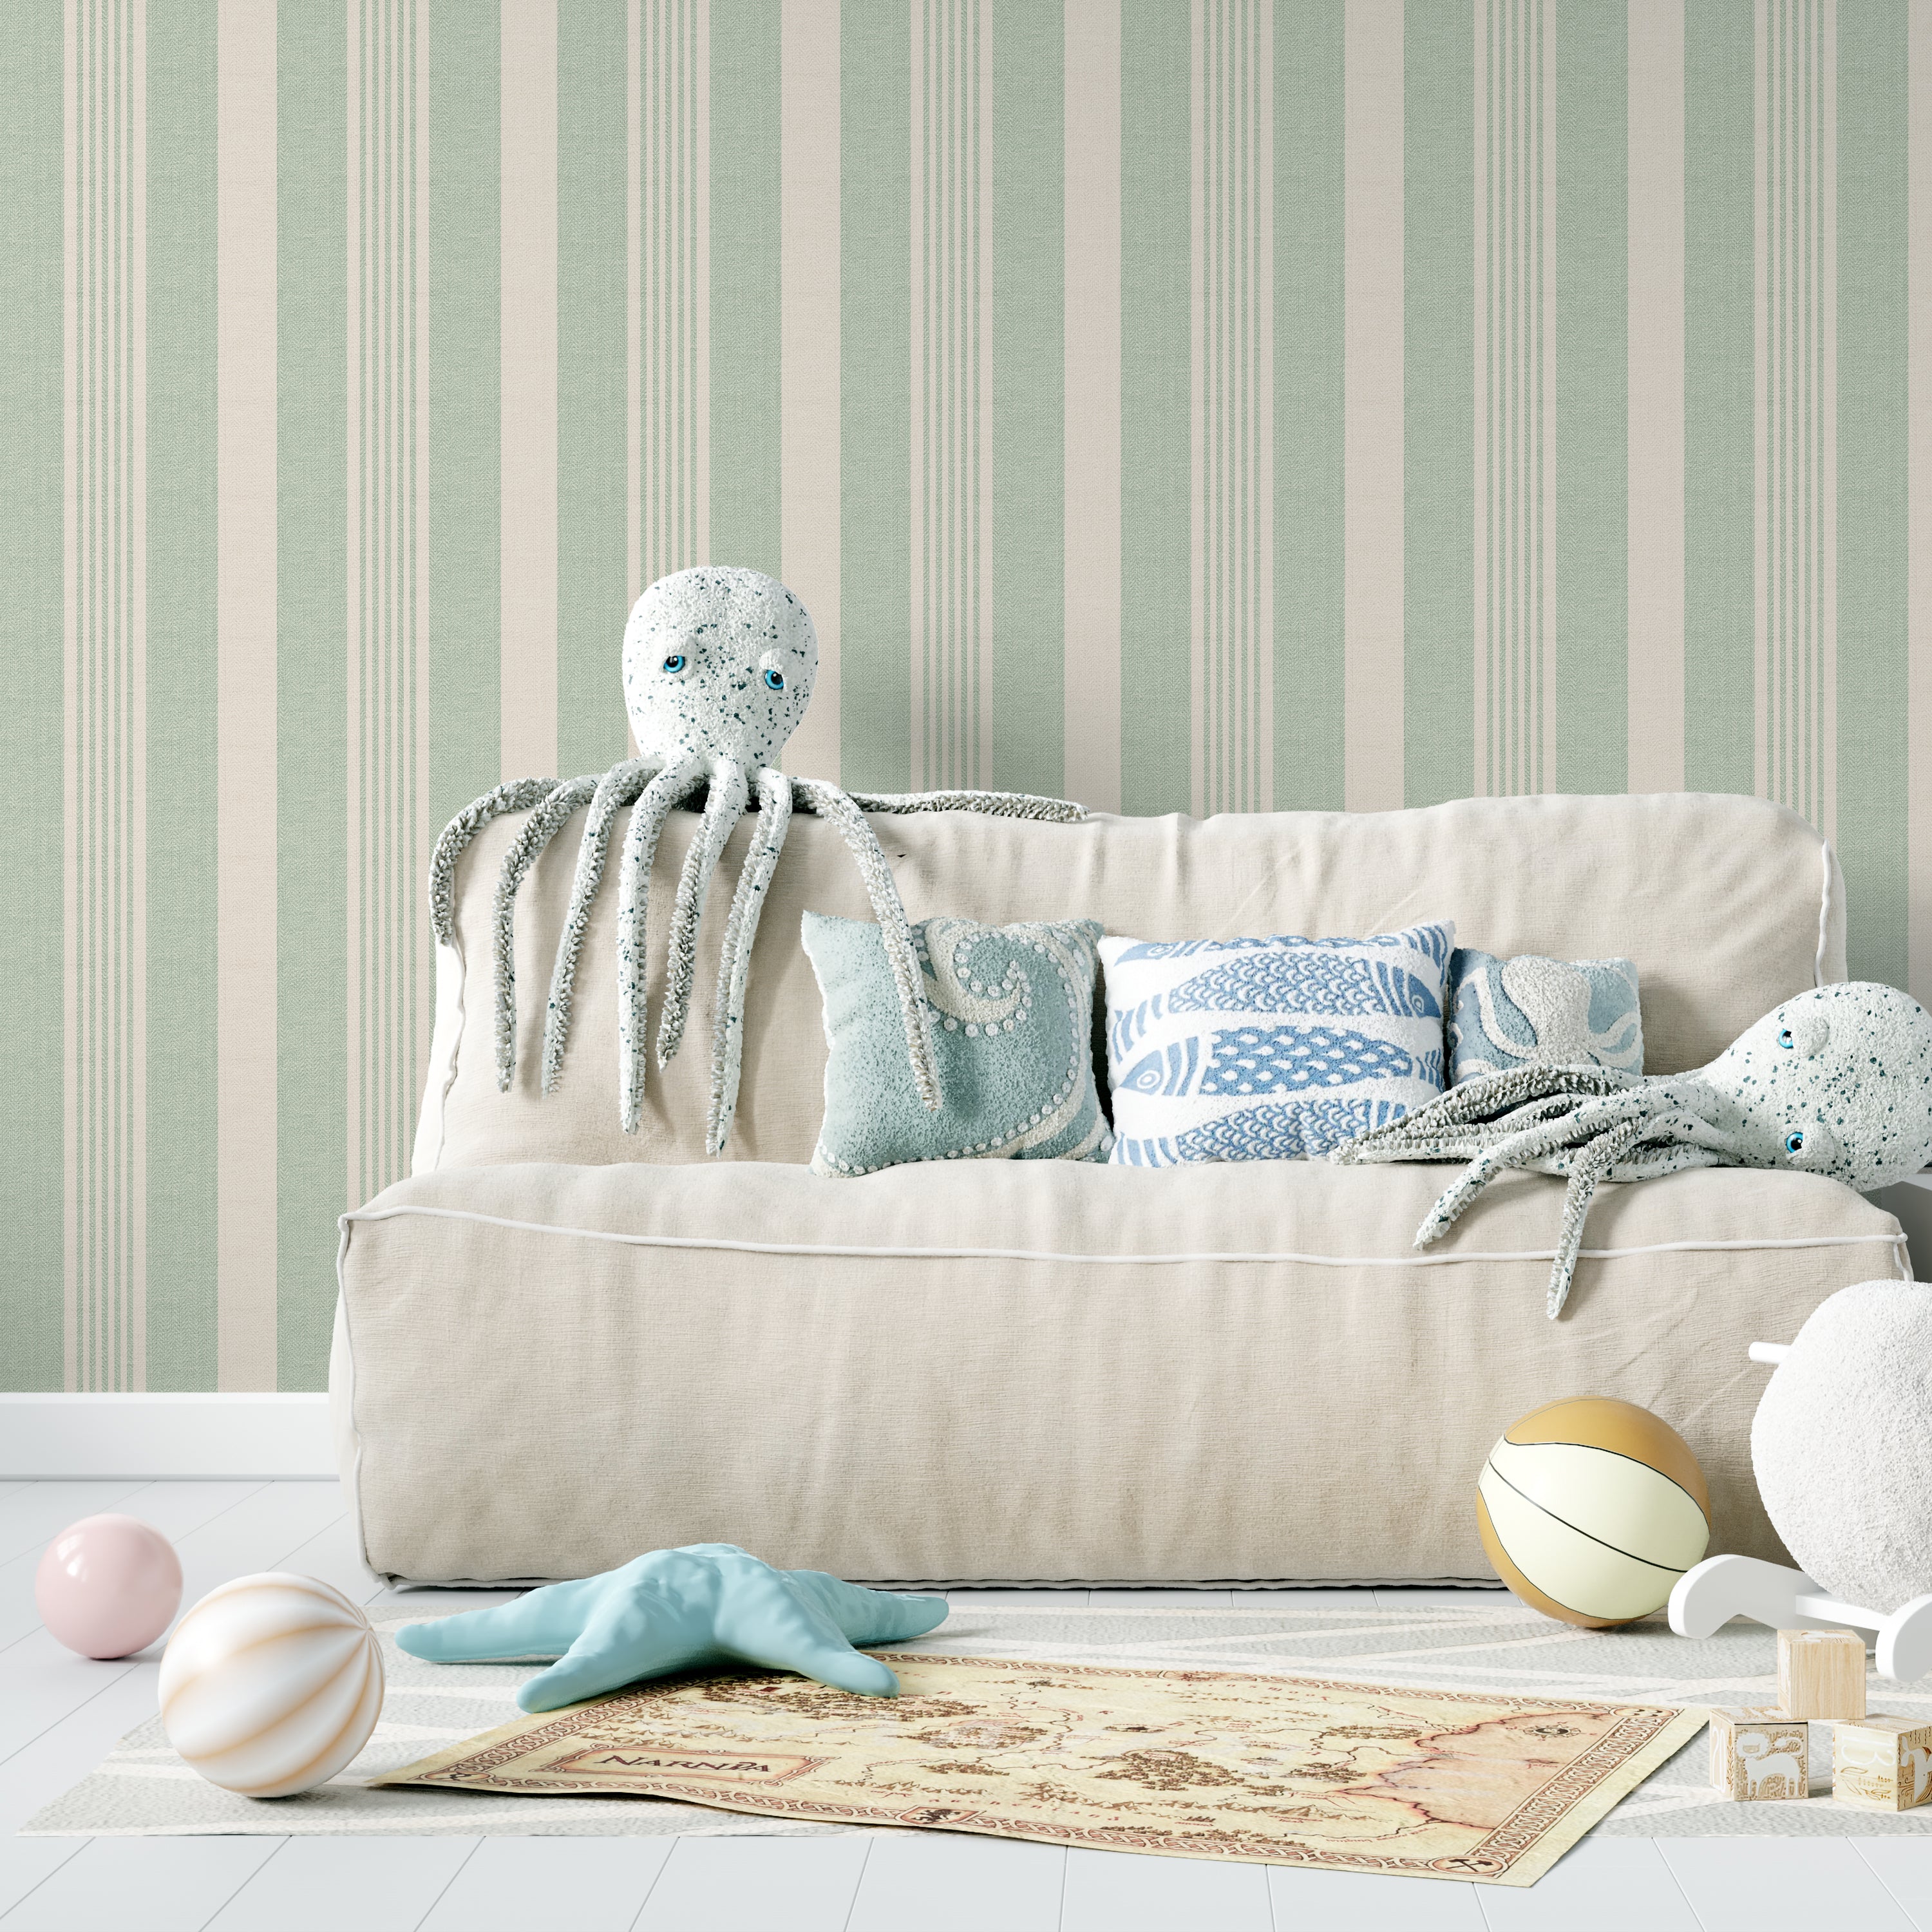 A whimsical children’s room setup showcasing Ticking Fabrics 12 Wallpaper with vertical stripes in sage green and cream. The scene includes plush sea creature toys on a sofa, enhancing the playful and inviting atmosphere of the room, perfect for a child's play area or bedroom